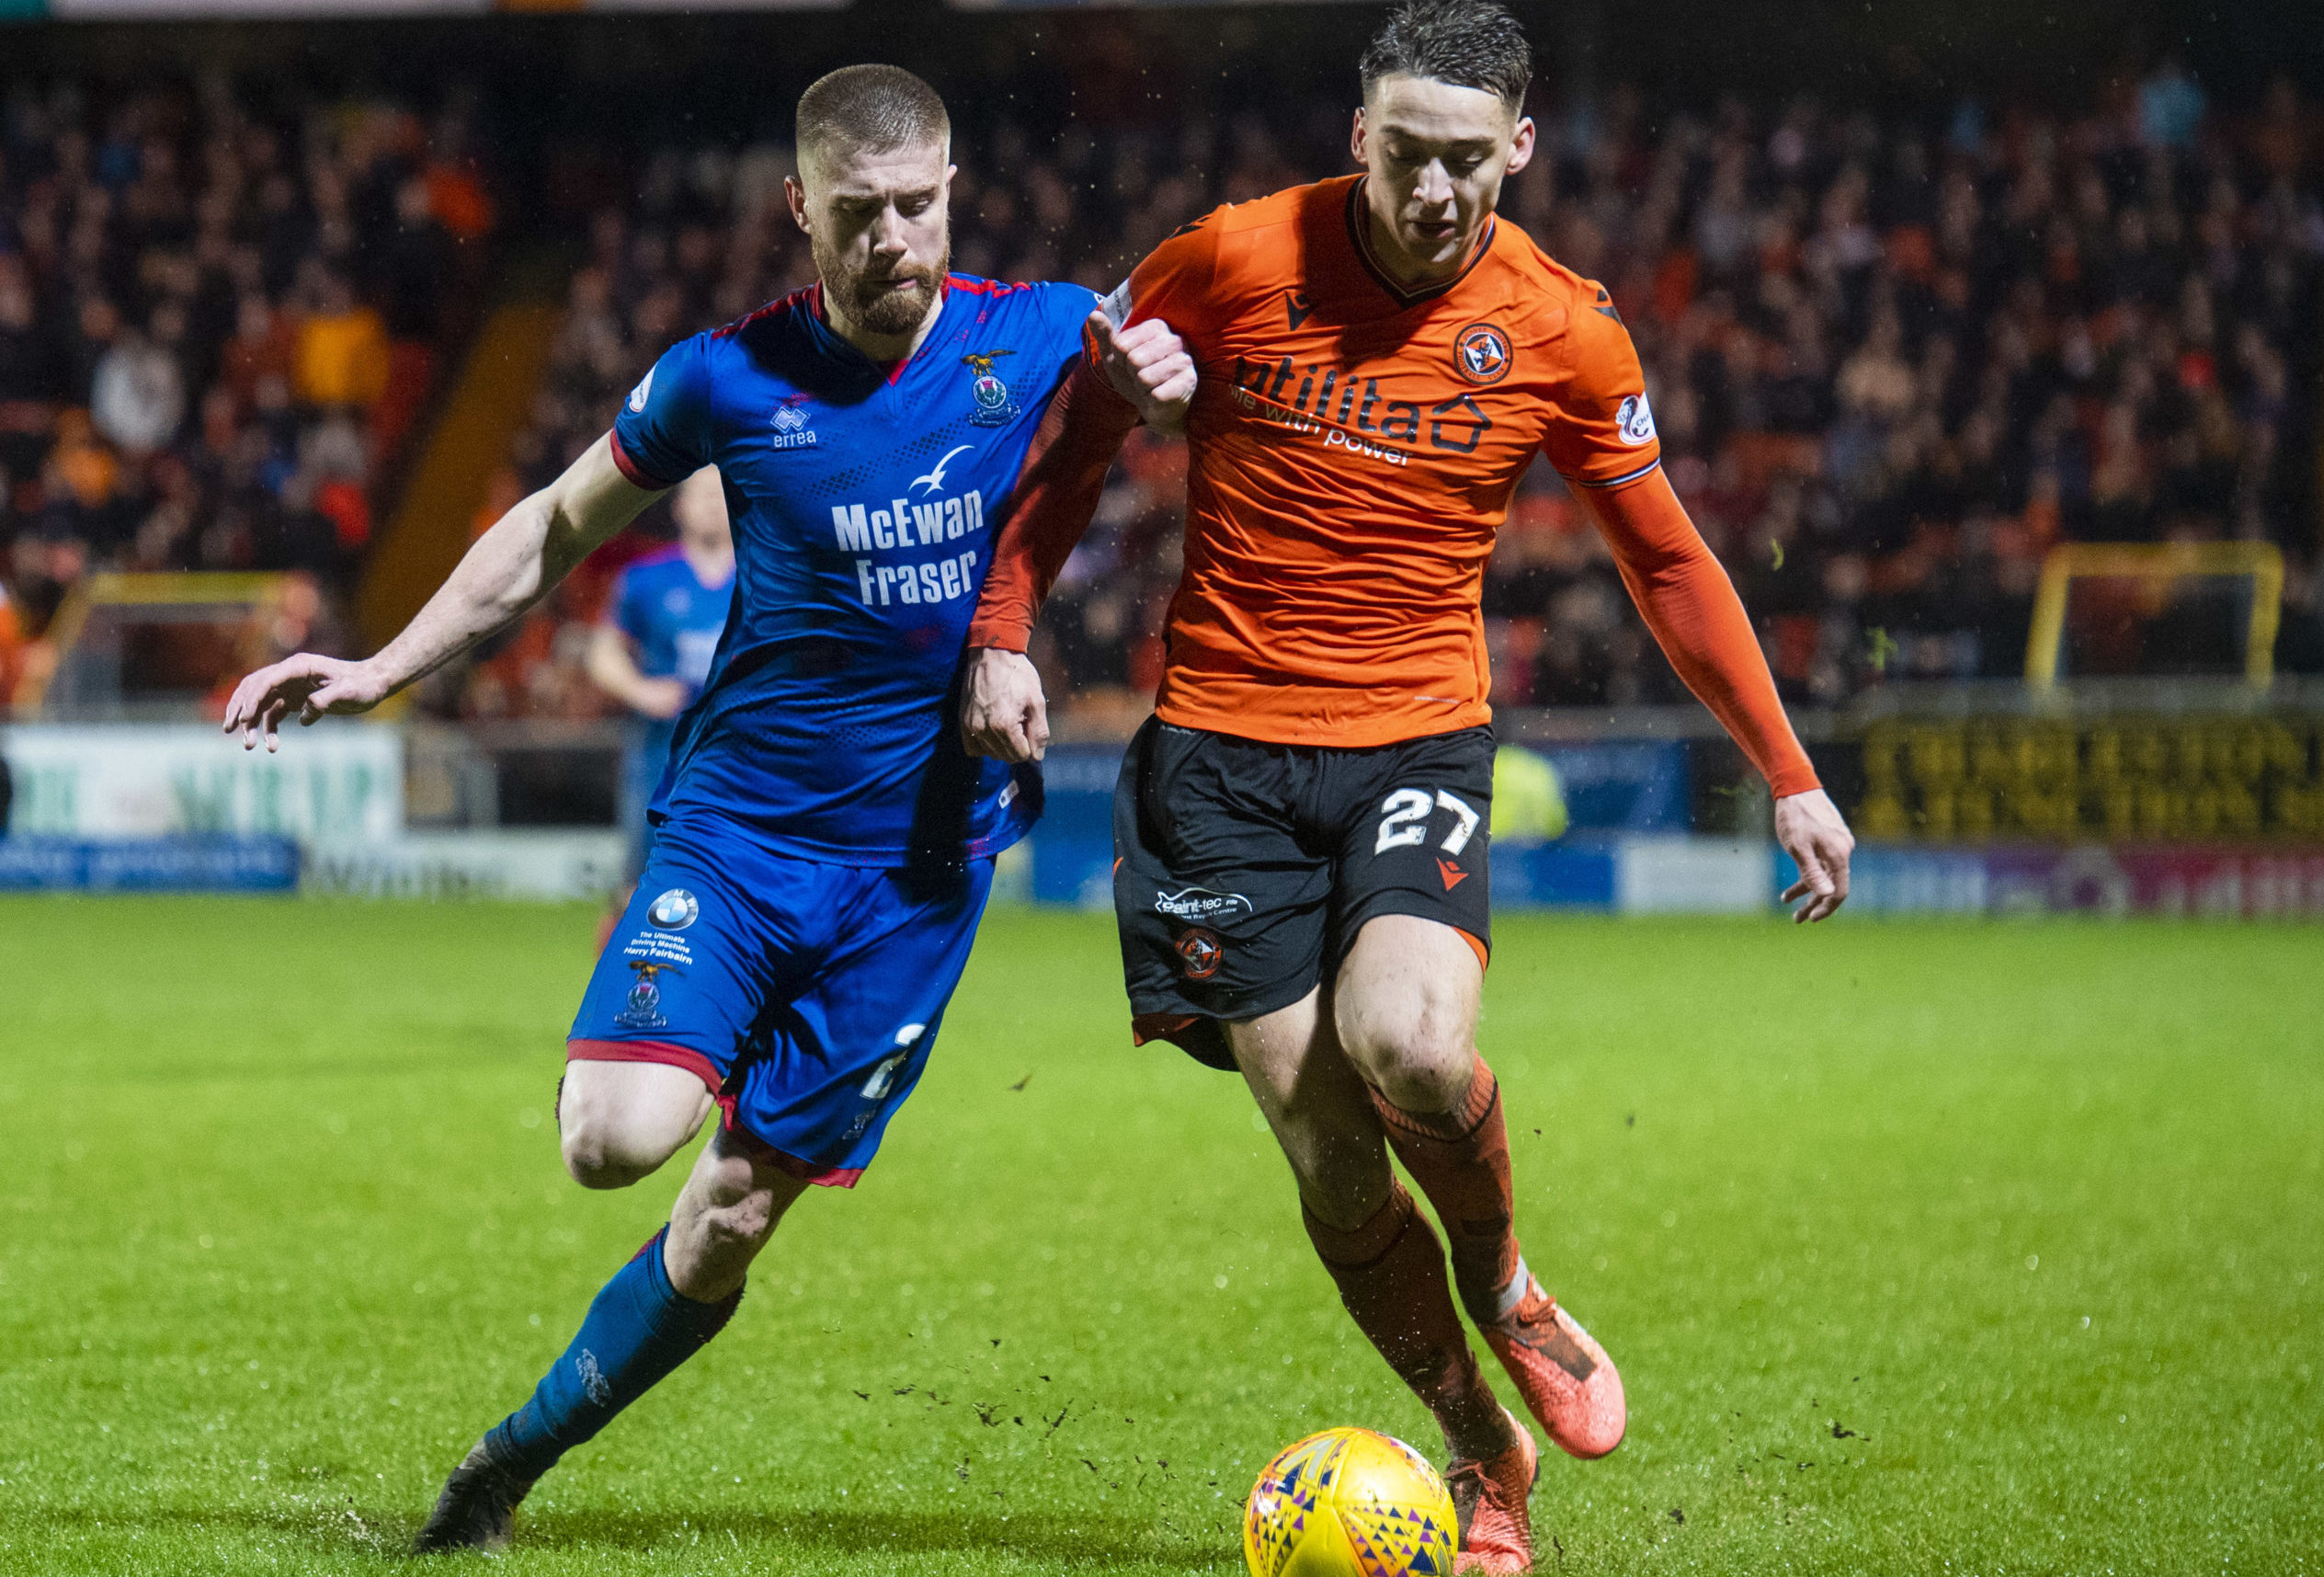 Shaun Rooney (left) in action with Dundee United's Louis Appere.